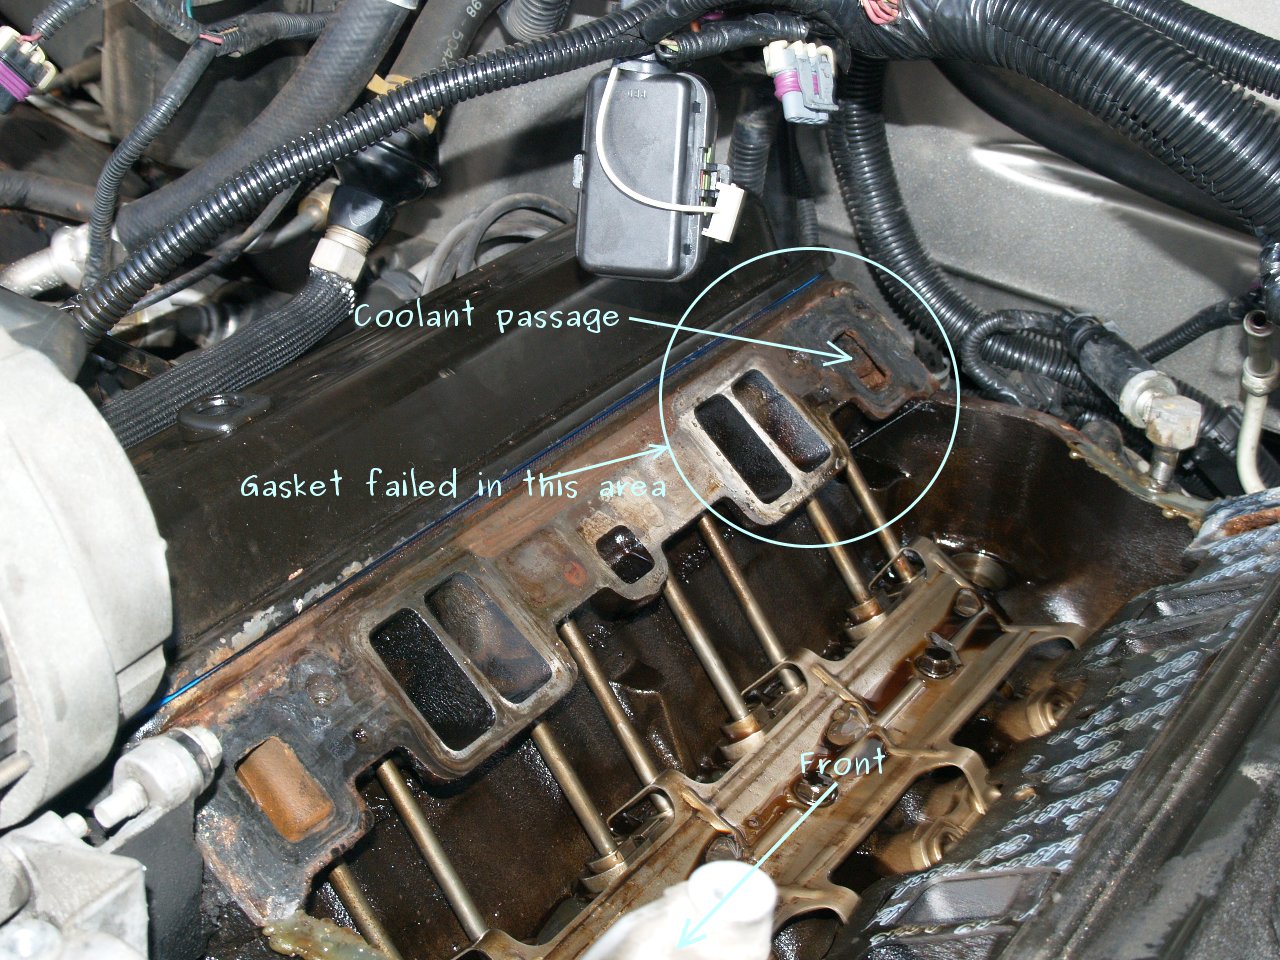 See P0715 in engine